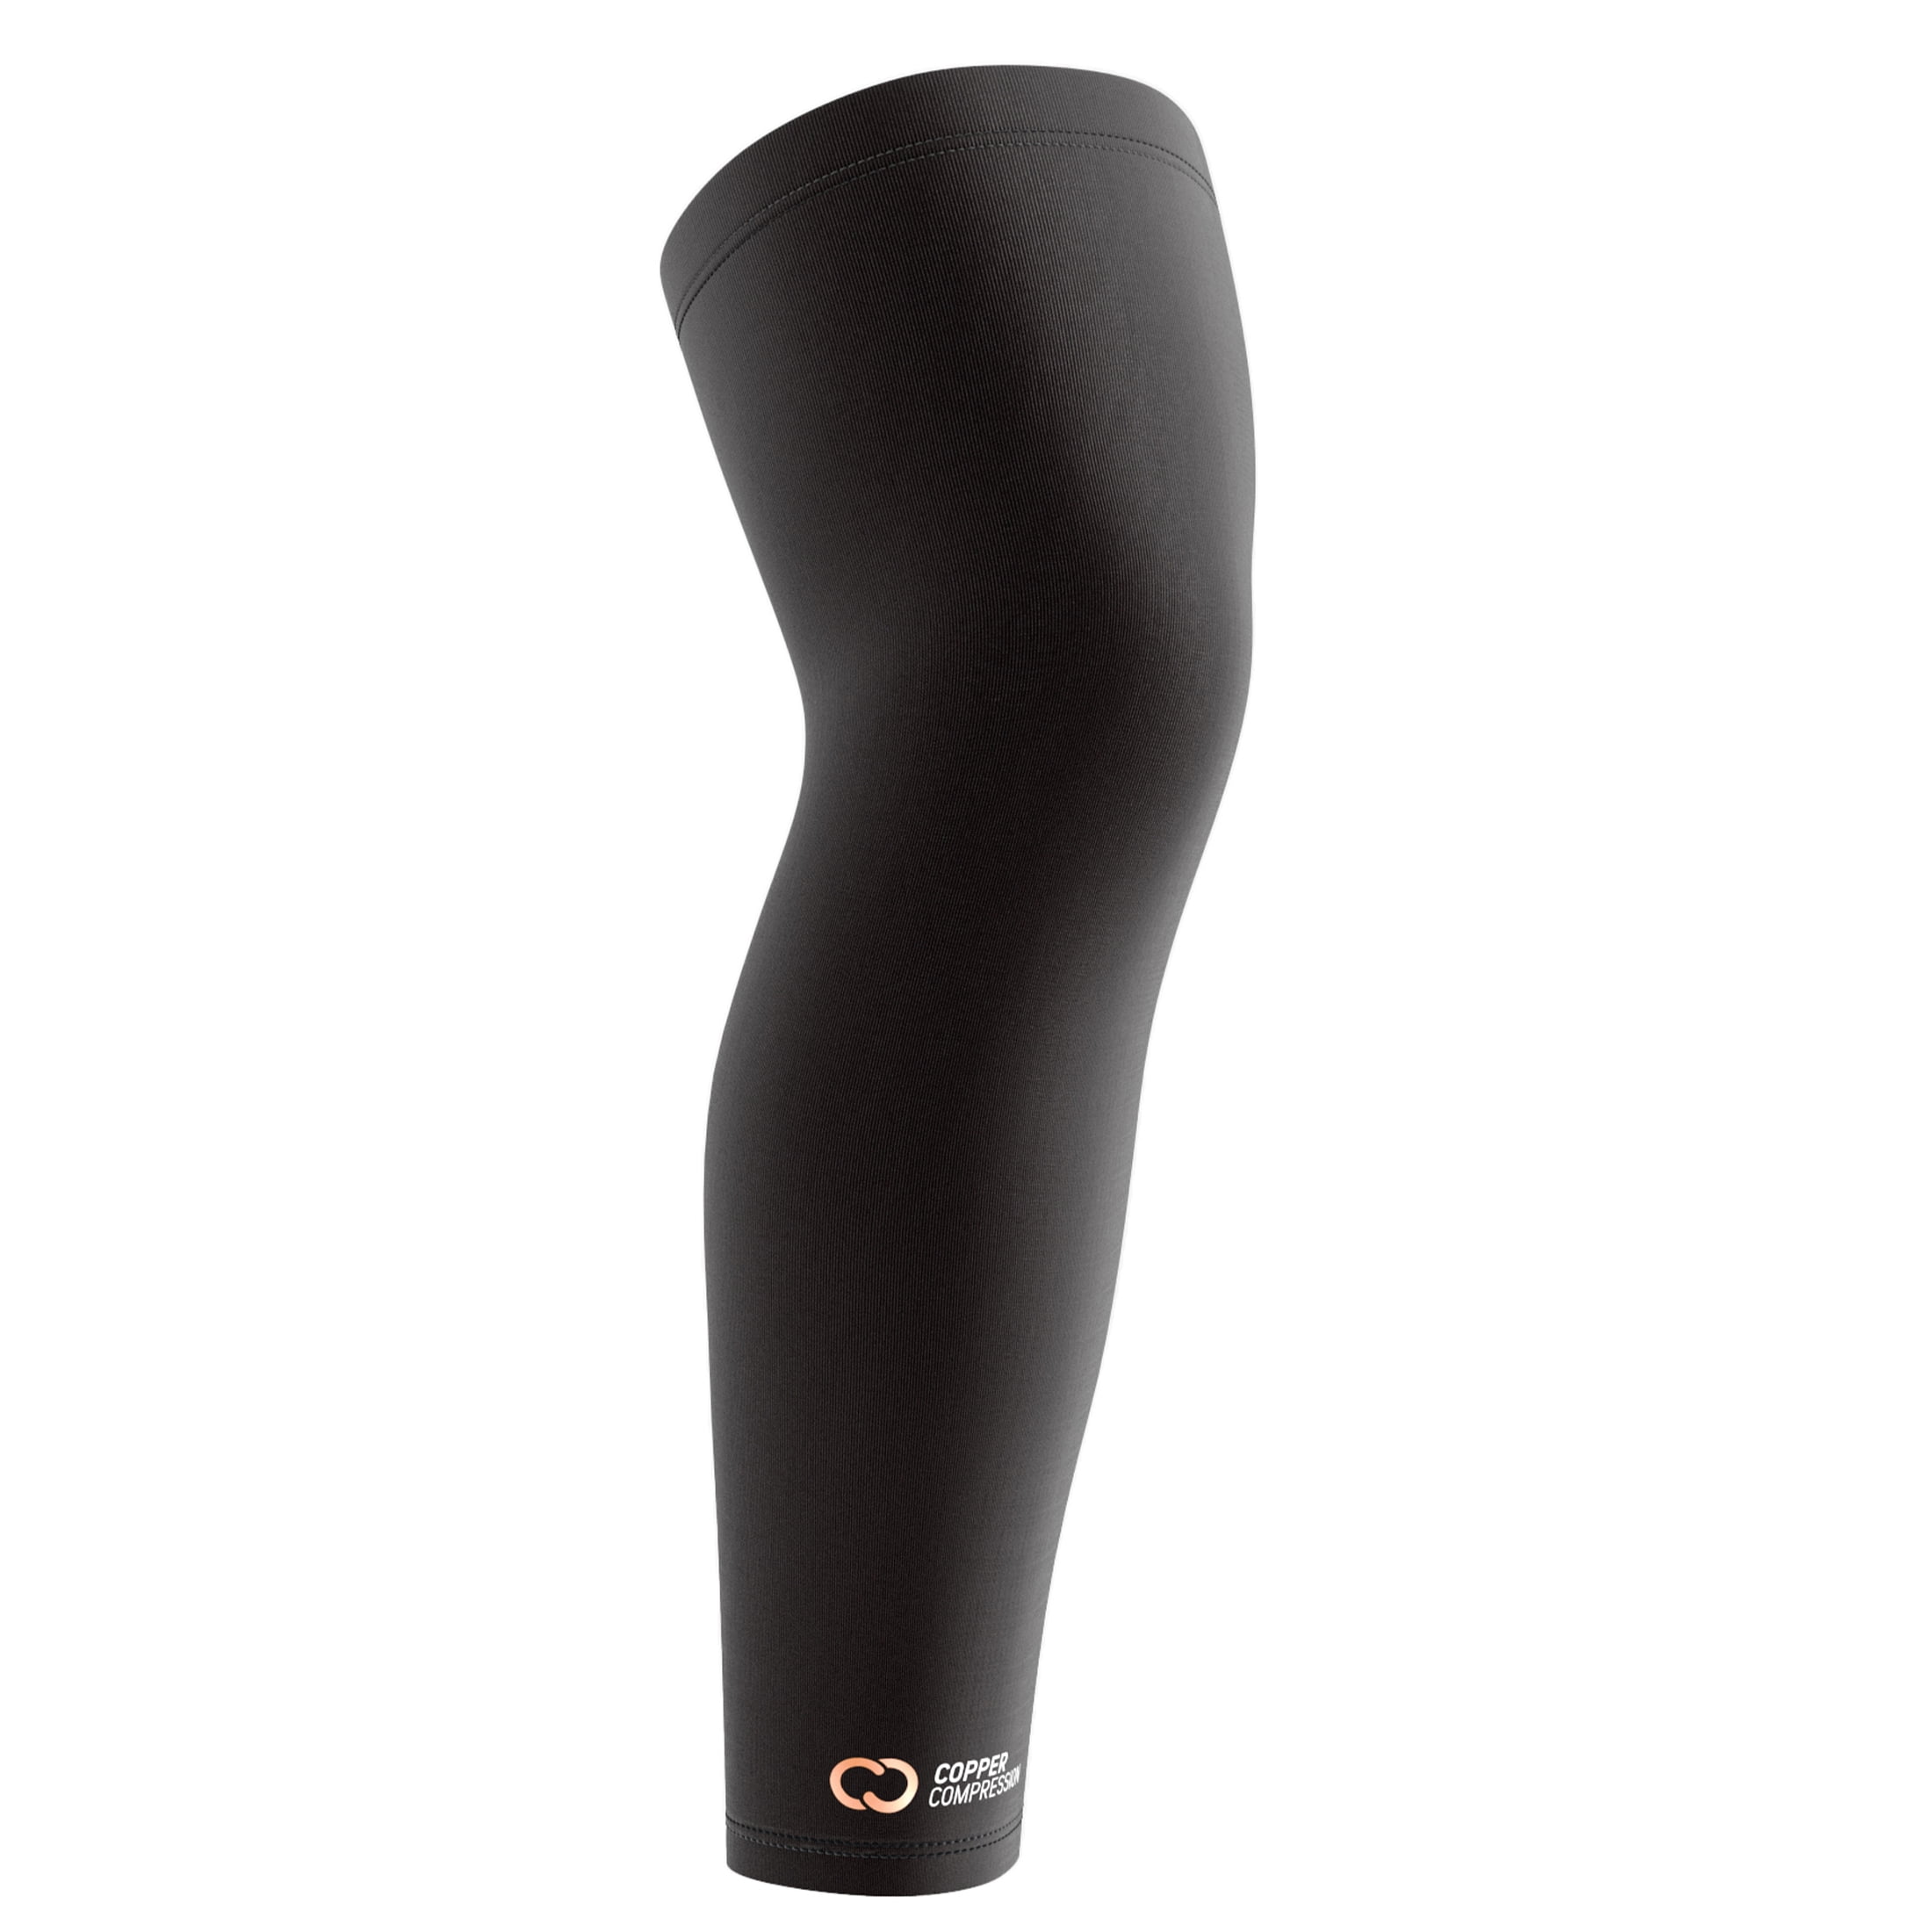 Copper Compression PRO+ Performance Leg Sleeve S-M: Targeted Compression  for Pain Relief from Shin Splints and Sore Muscles and Peak Performance for  Running, Basketball, Football. Fits men and women. 